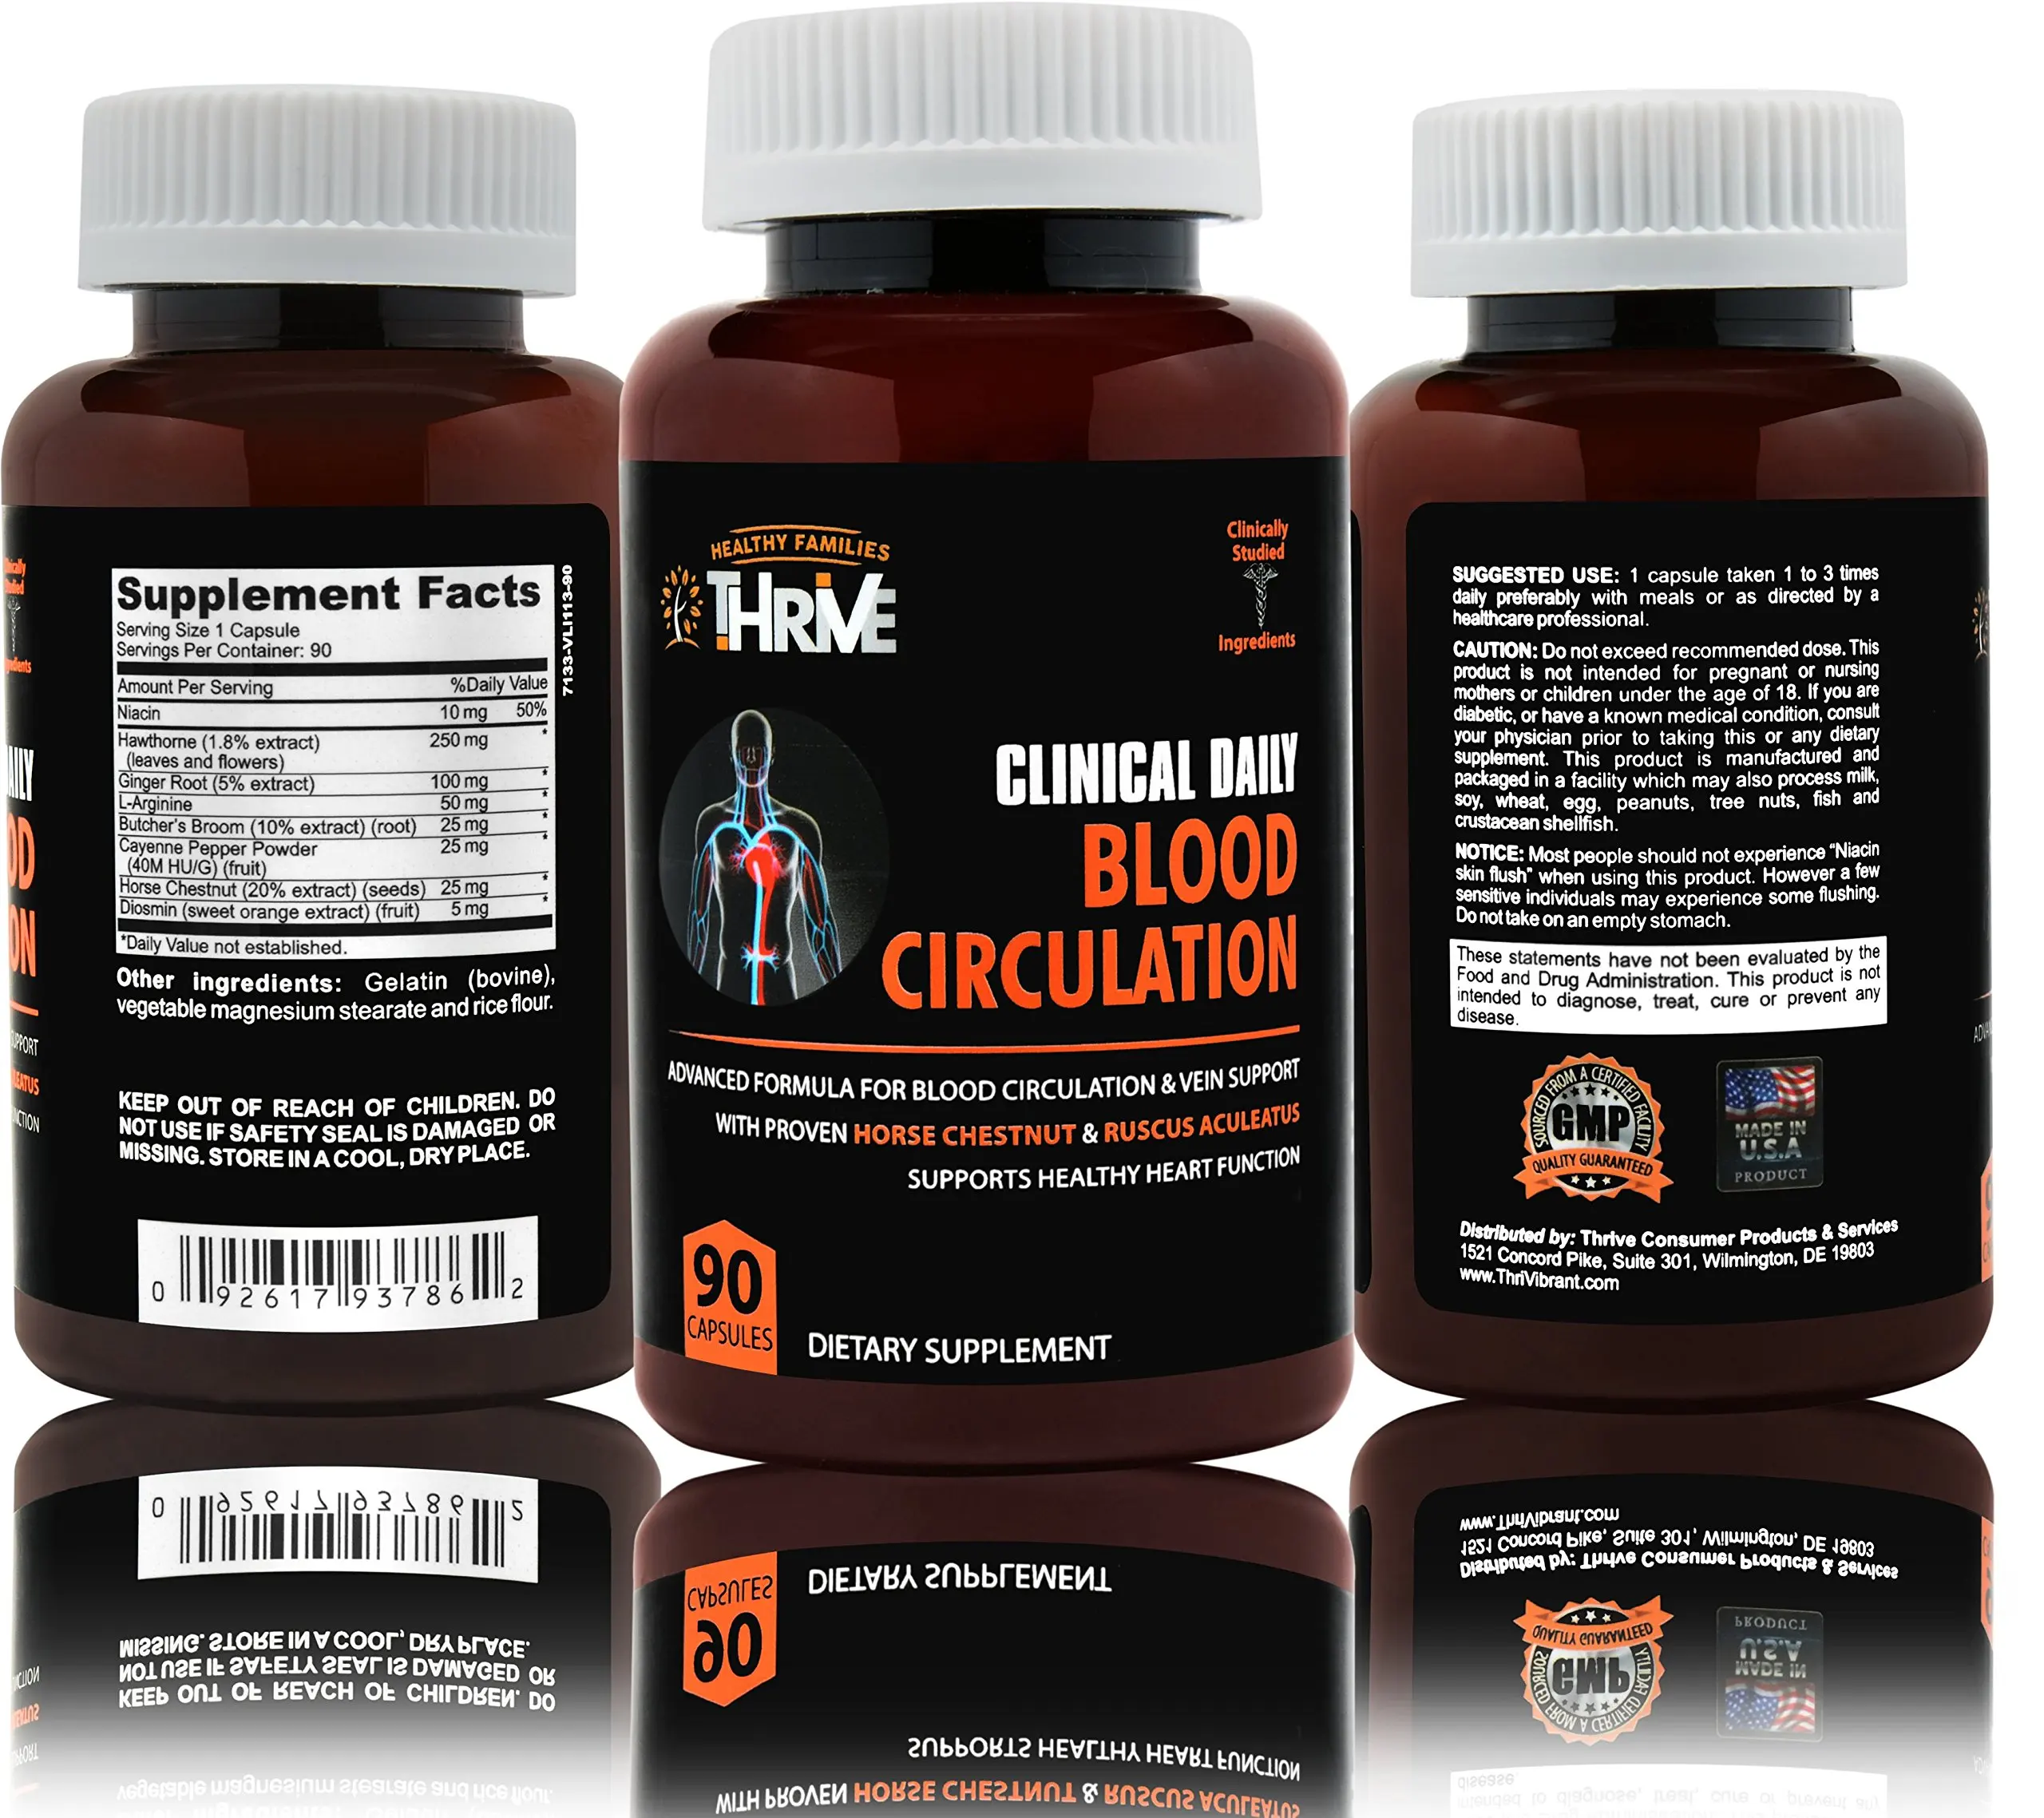 CLINICAL DAILY Blood Circulation Supplement. 